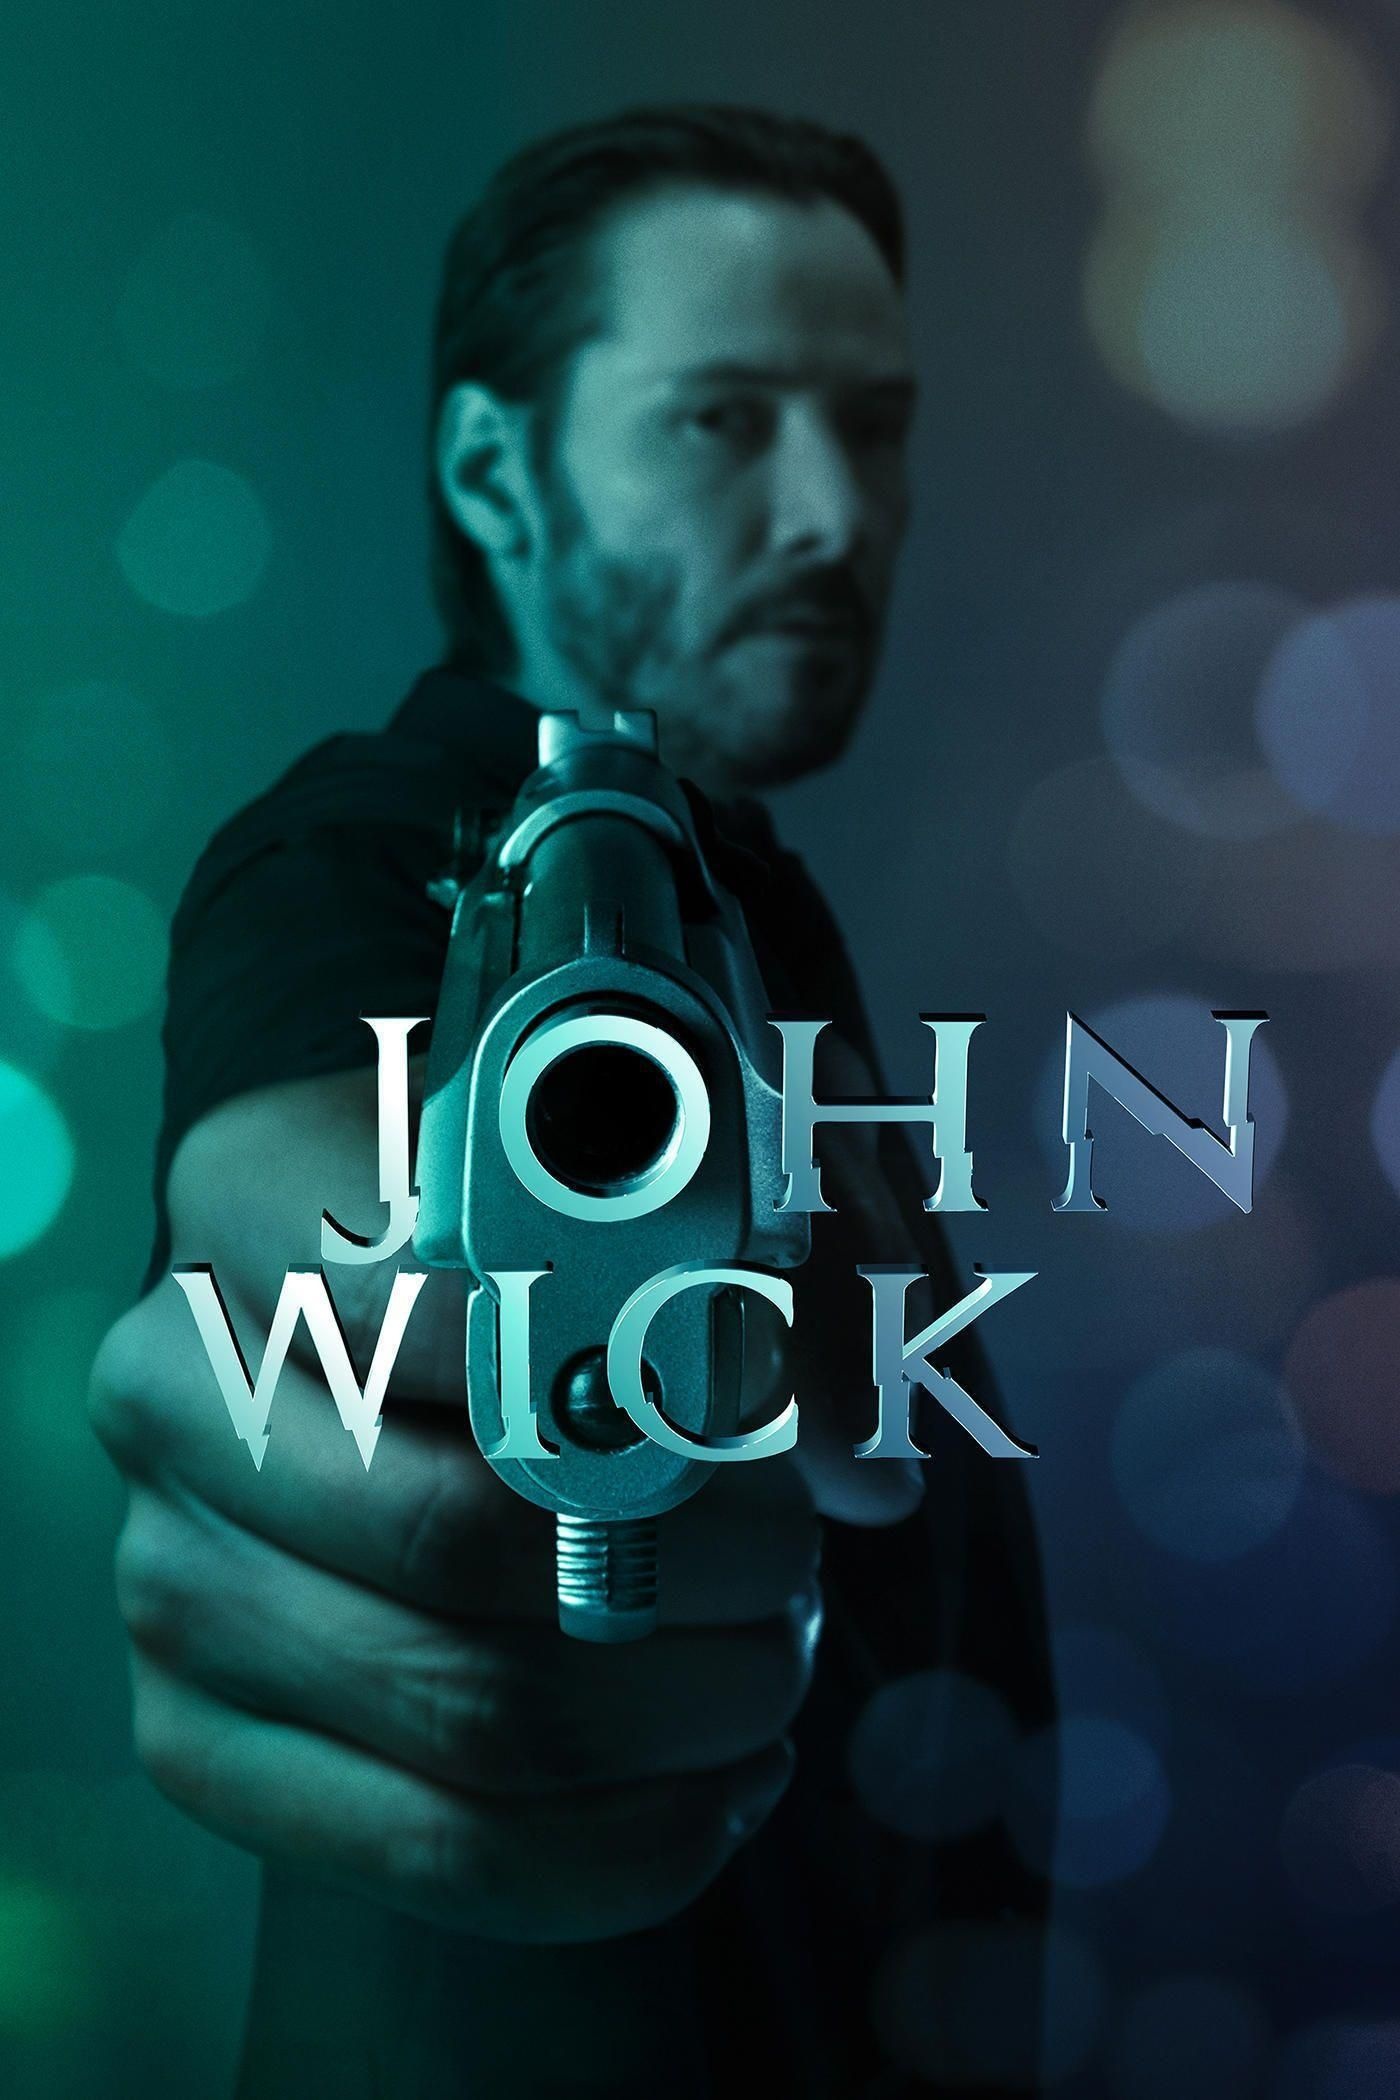 John Wick wallpapers, Movie-themed, Keanu Reeves, High-octane action, 1400x2100 HD Phone